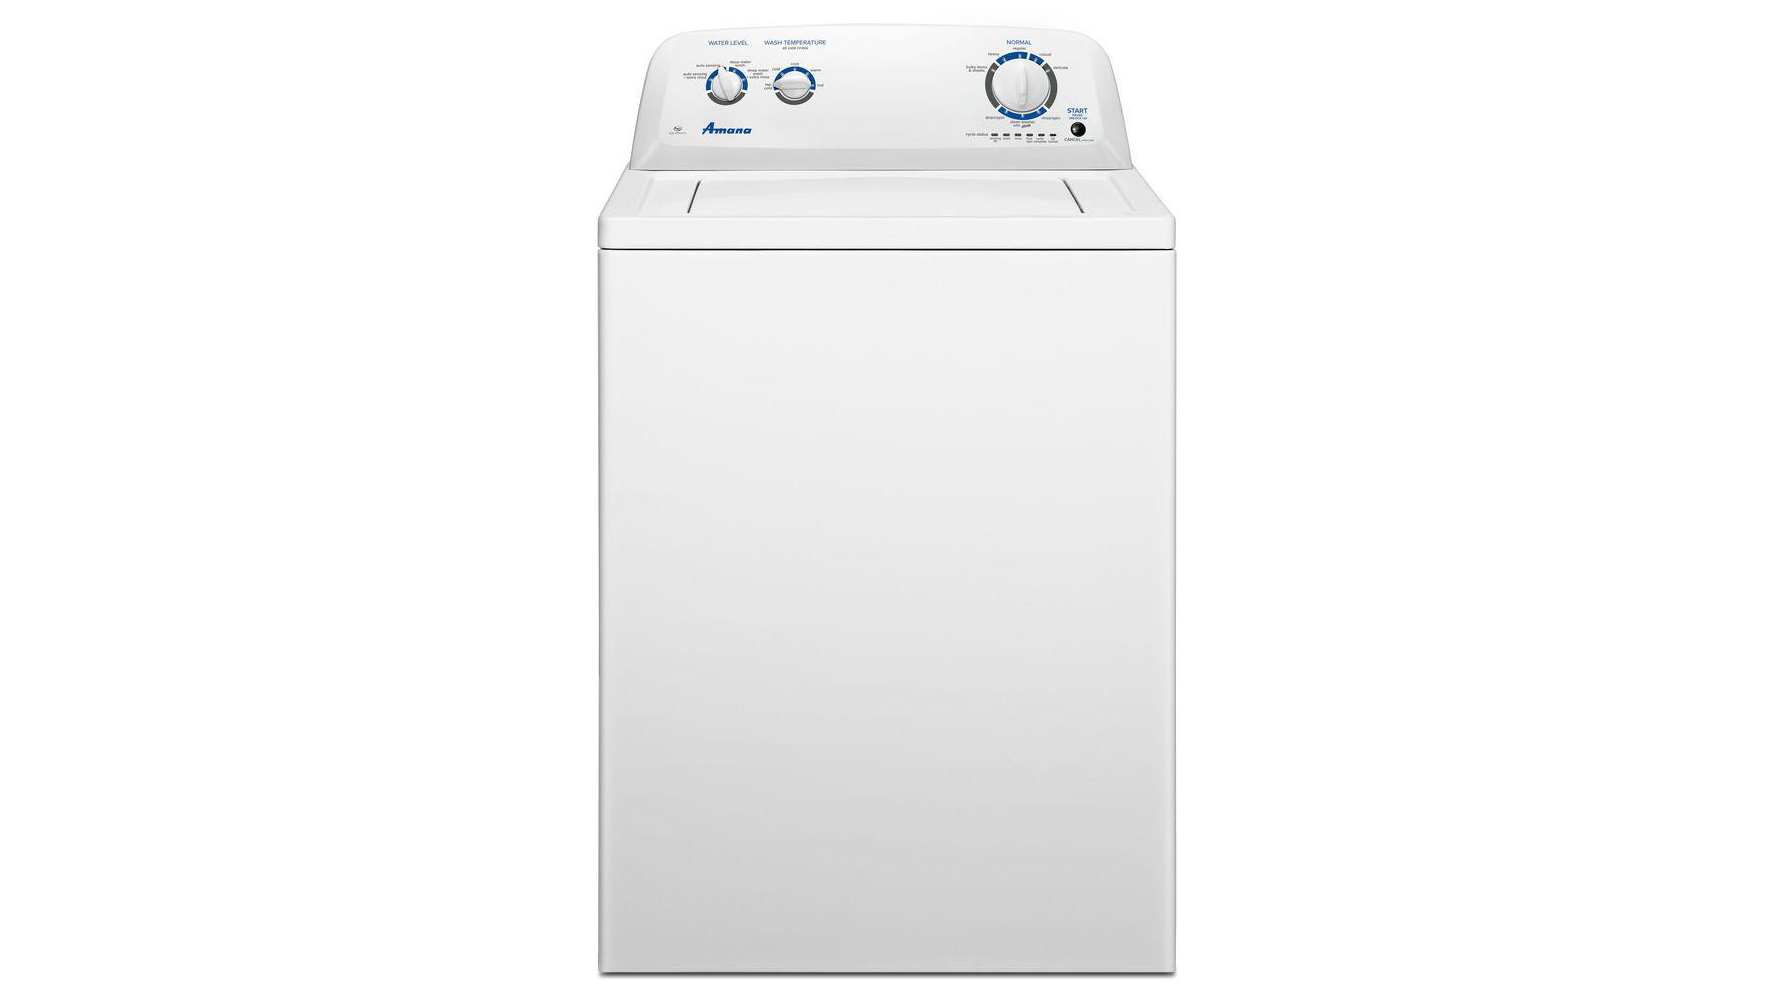 Best top load washers: Amana NTW4516FW